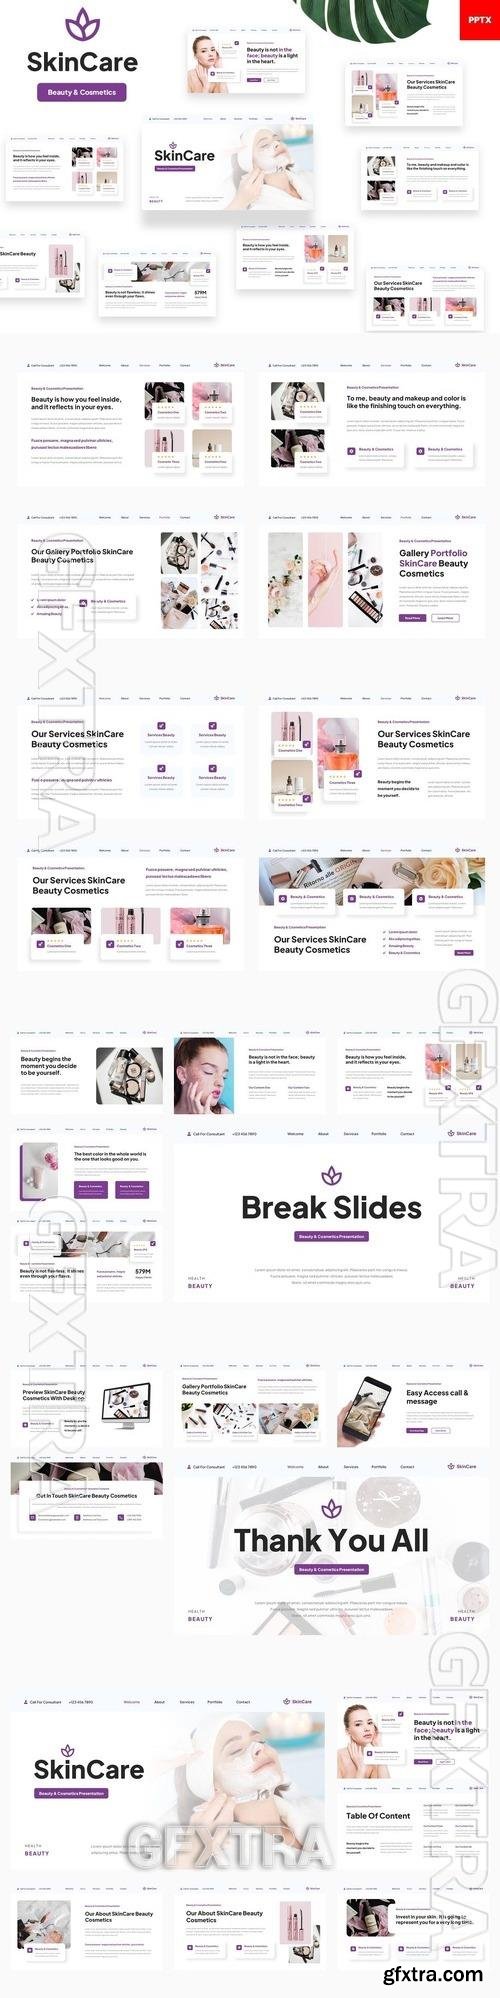 SkinCare - Beauty and Cosmetics PowerPoint, Keynote and Google Slides